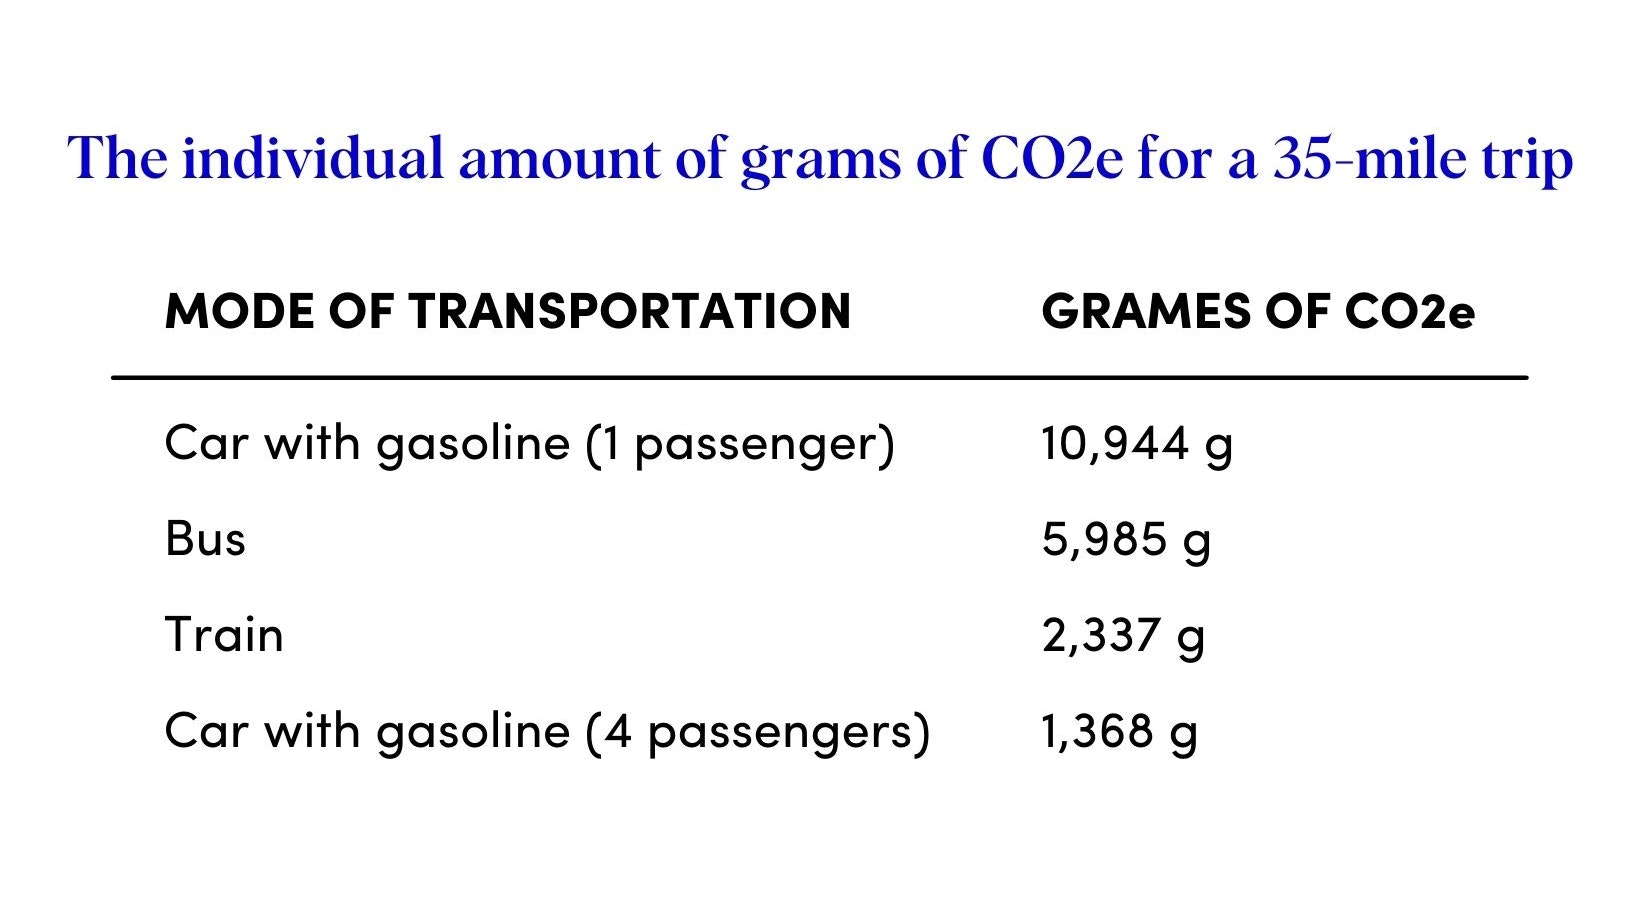 The individual amount of grams of CO2e for a 35-mile trip